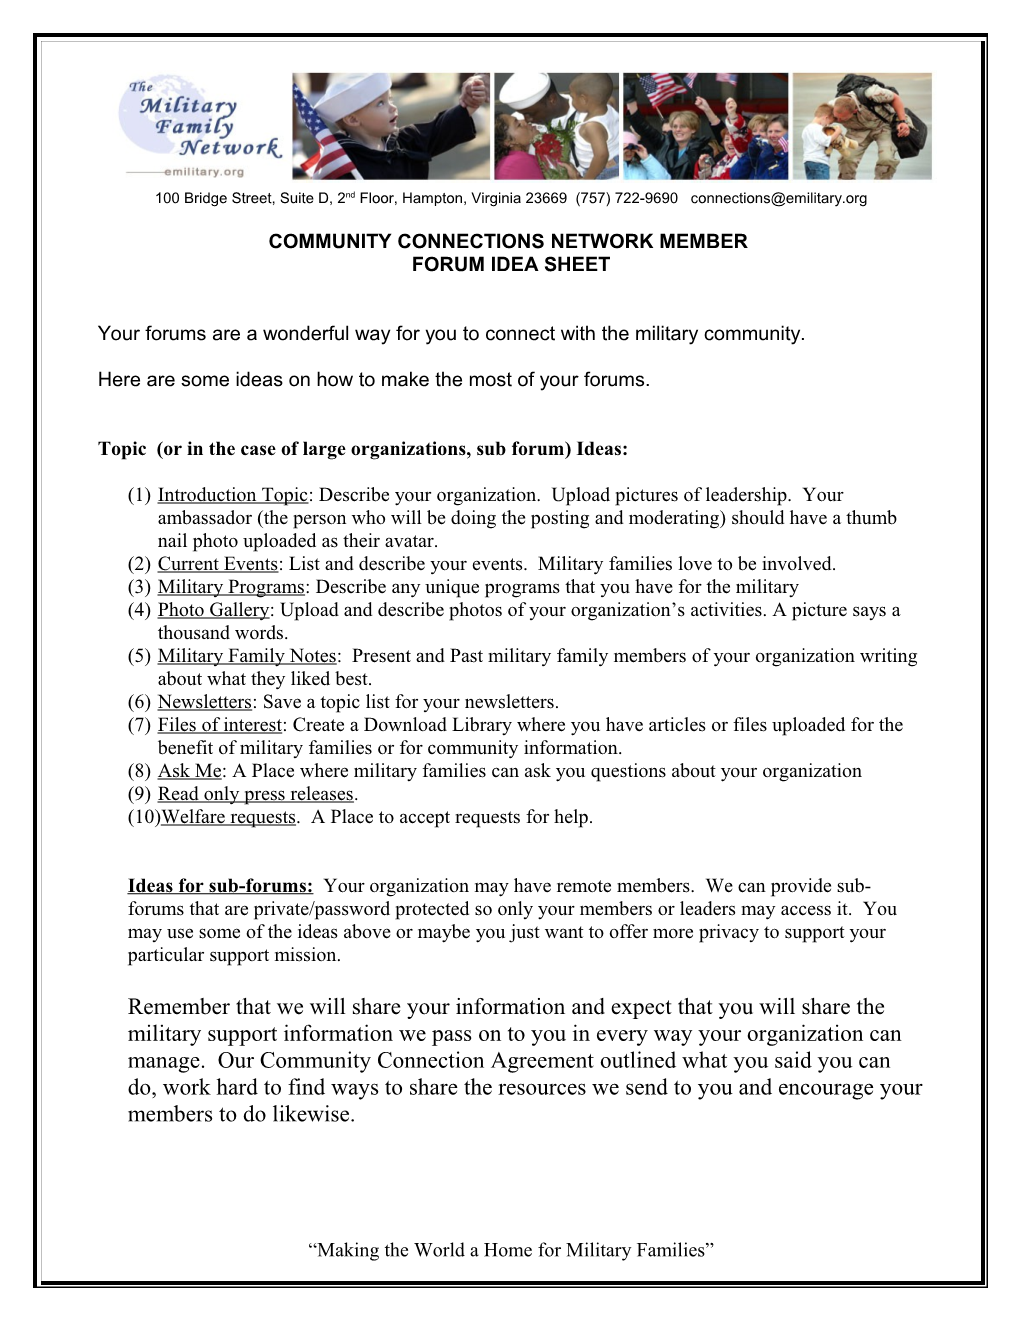 Military Family Network Community Report